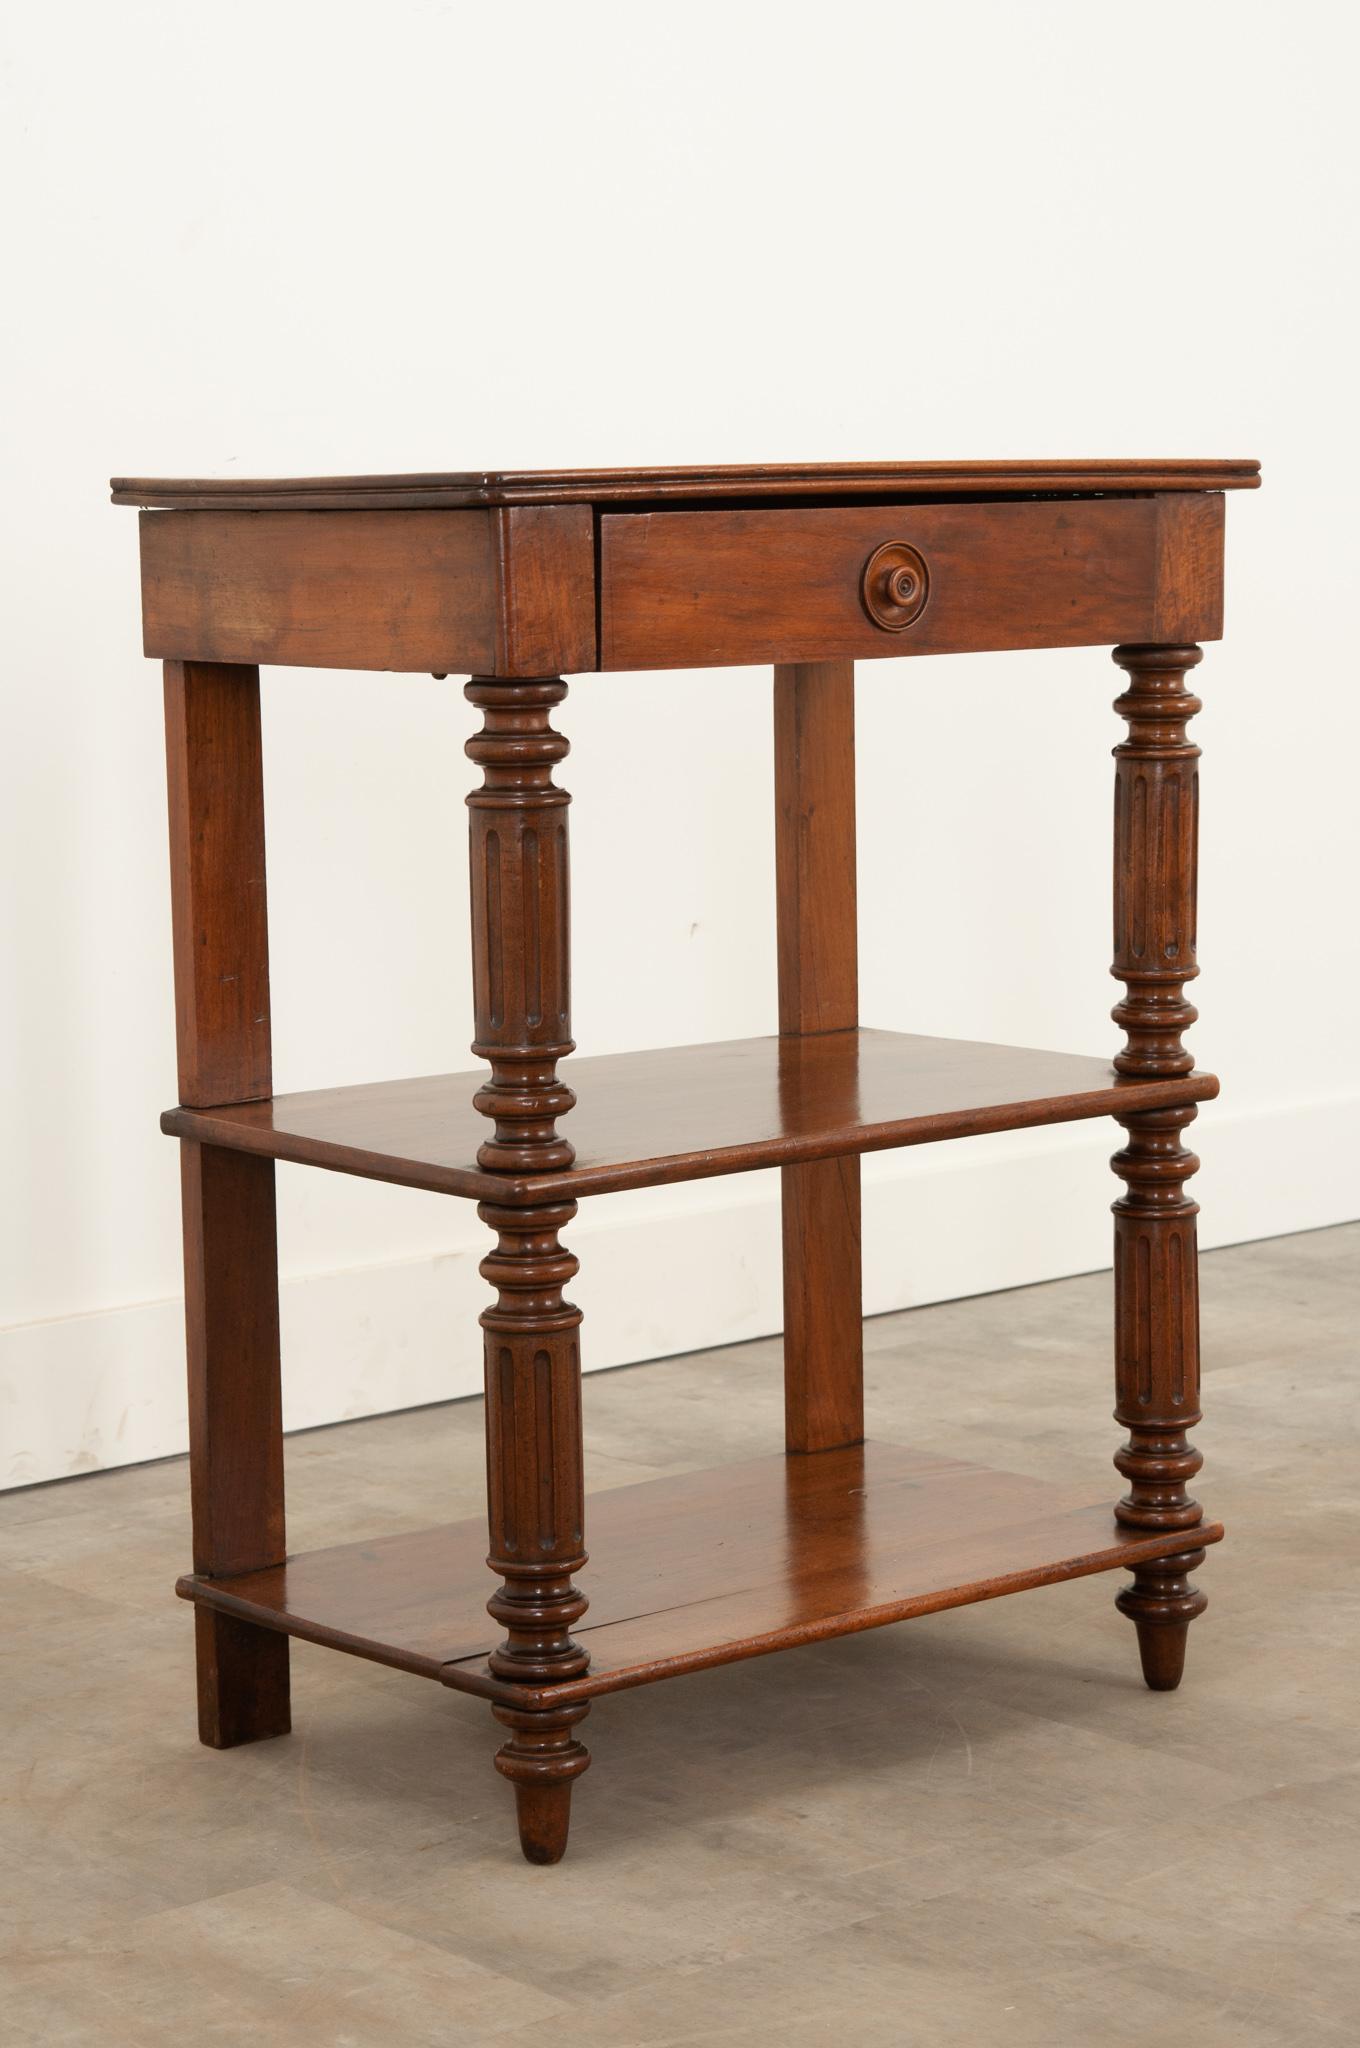 English Solid Walnut Etagere In Good Condition For Sale In Baton Rouge, LA